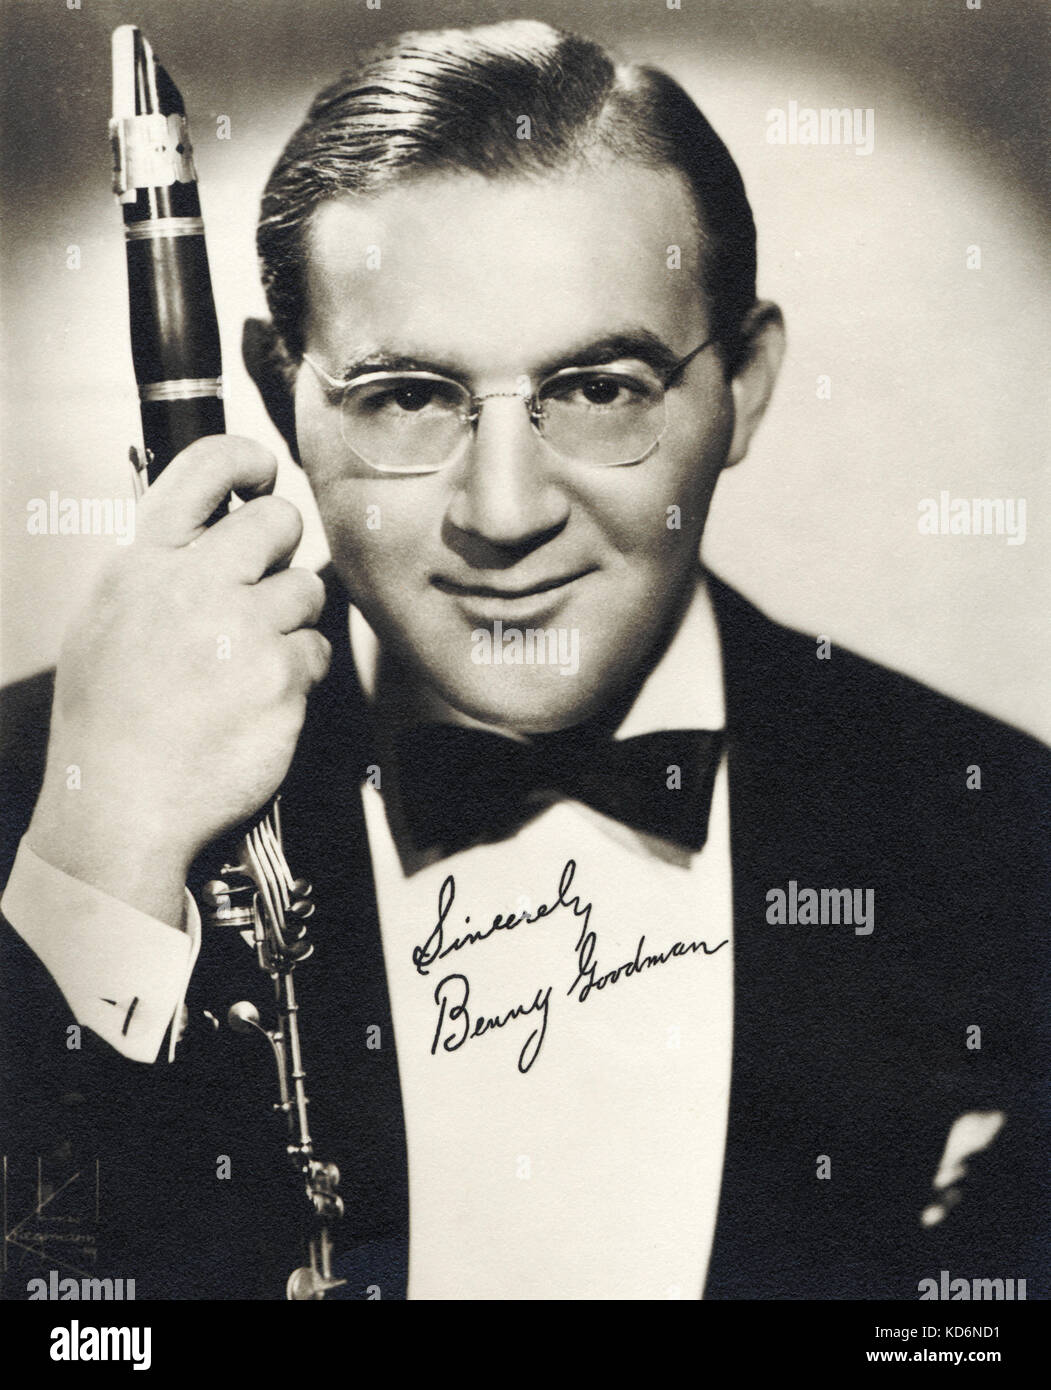 Benny Goodman  - portrait with clarinet. American clarinettist and bandleader,  1909-1986 Stock Photo